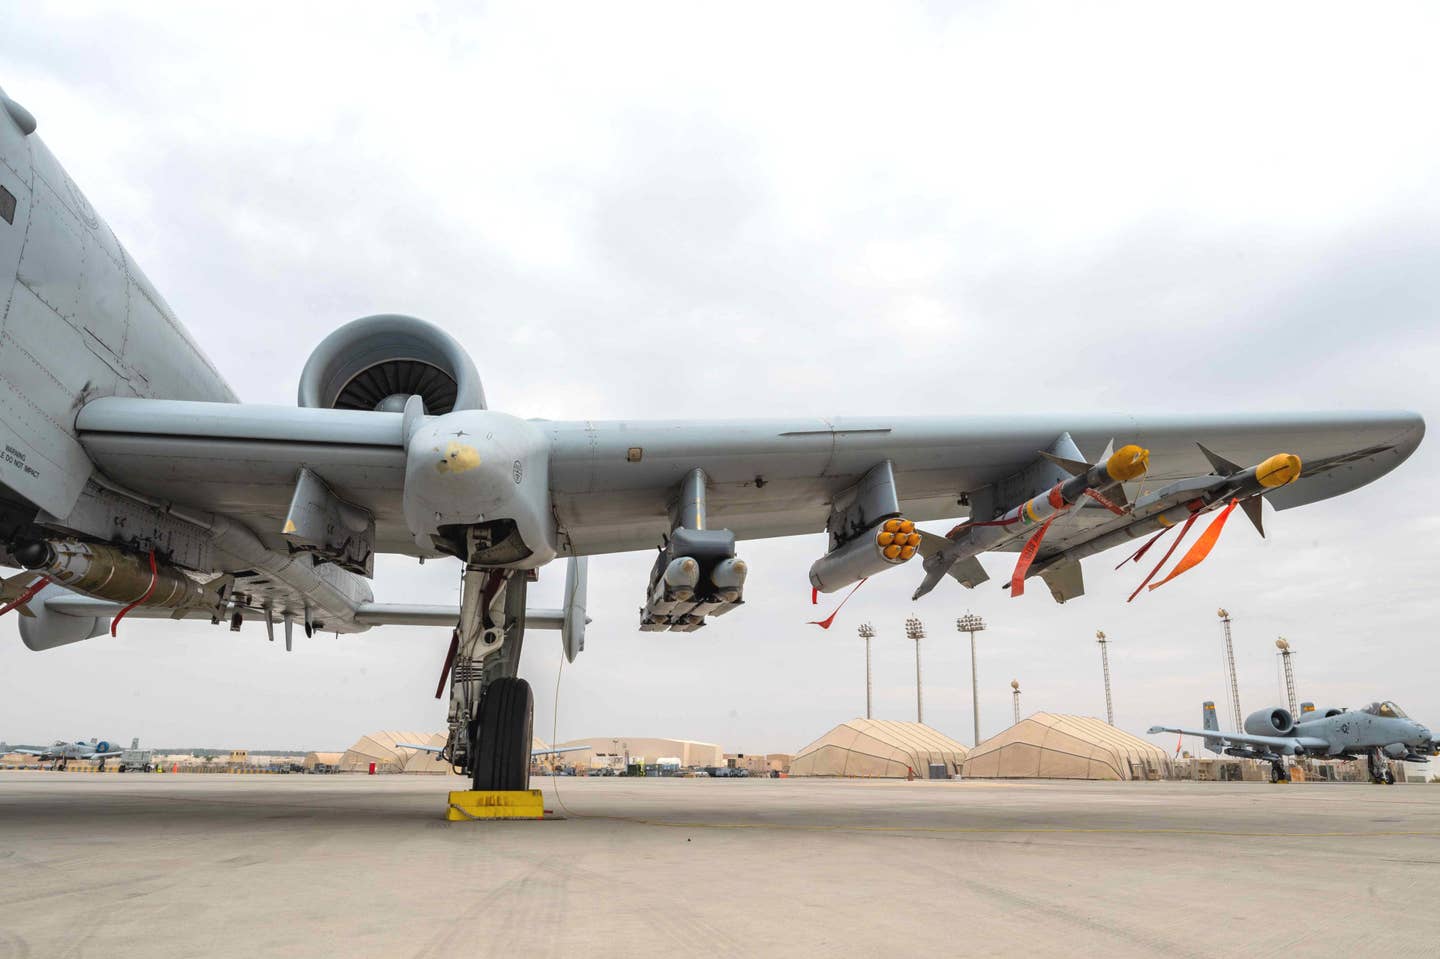 The seven-round 70mm rocket pod can be seen here just inboard of the two AIM-9M Sidewinders under the left wing of this A-10. <em>USAF</em>